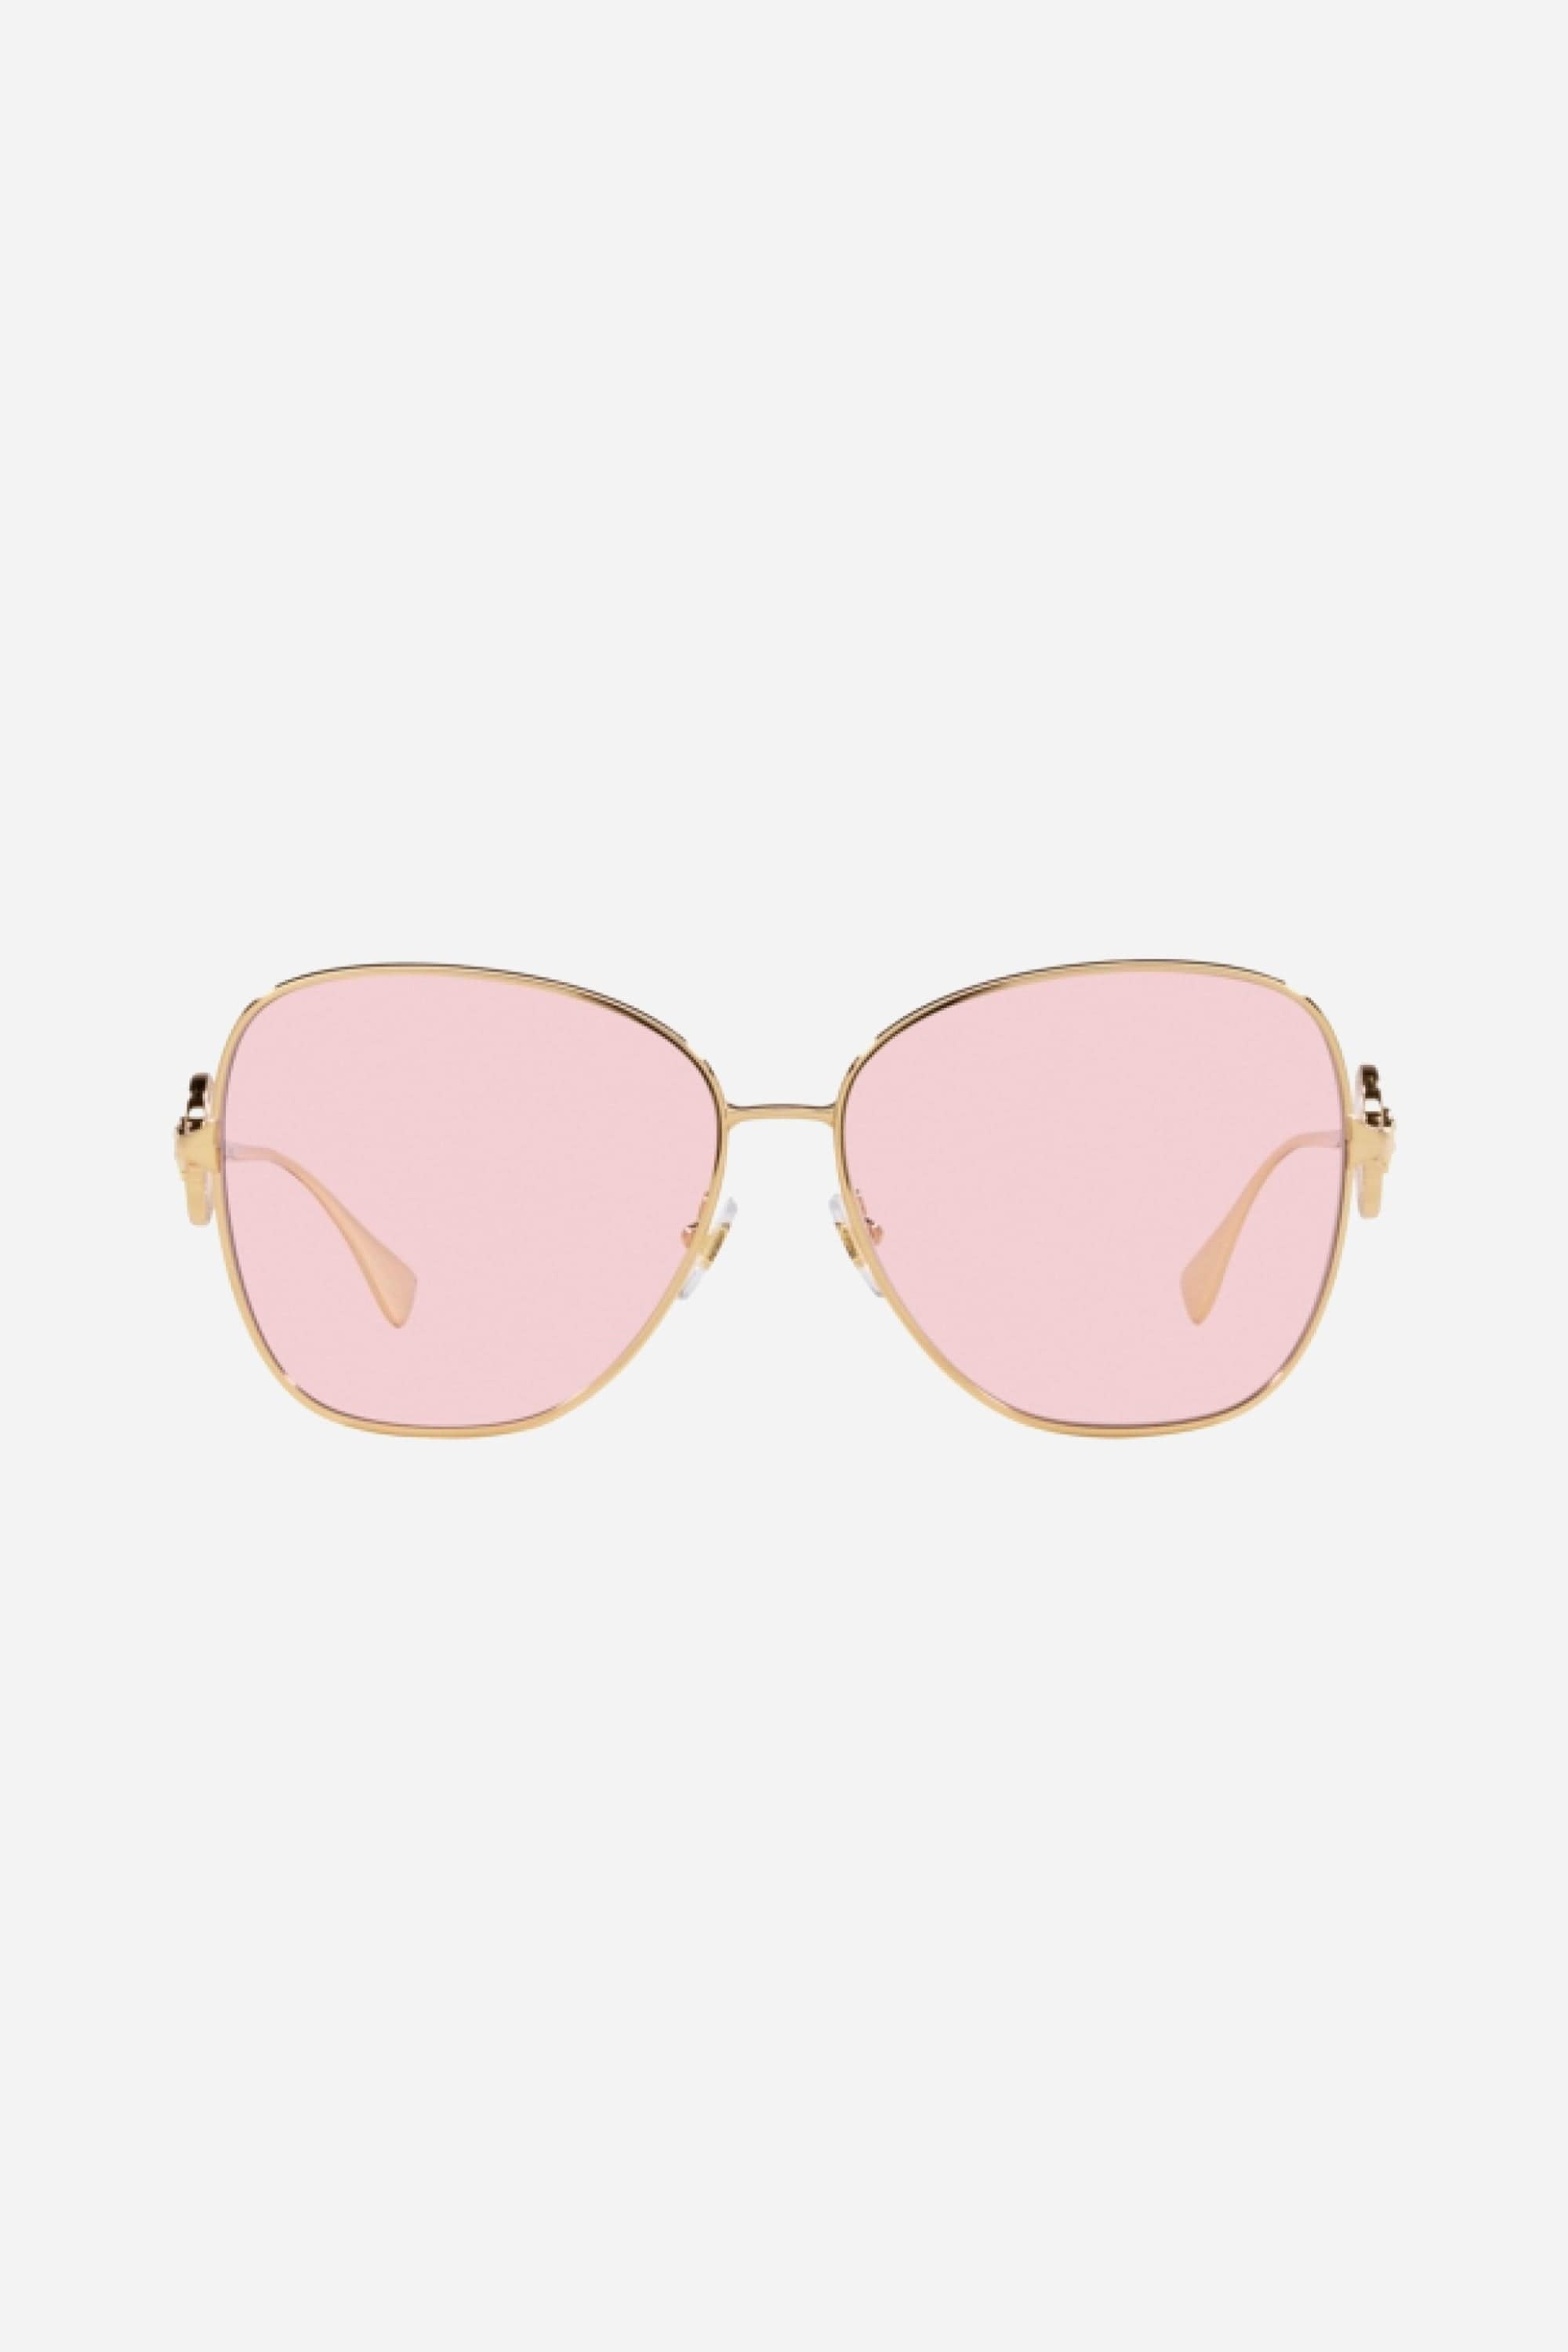 Versace gold butterfly sunglasses with orange lenses - Eyewear Club